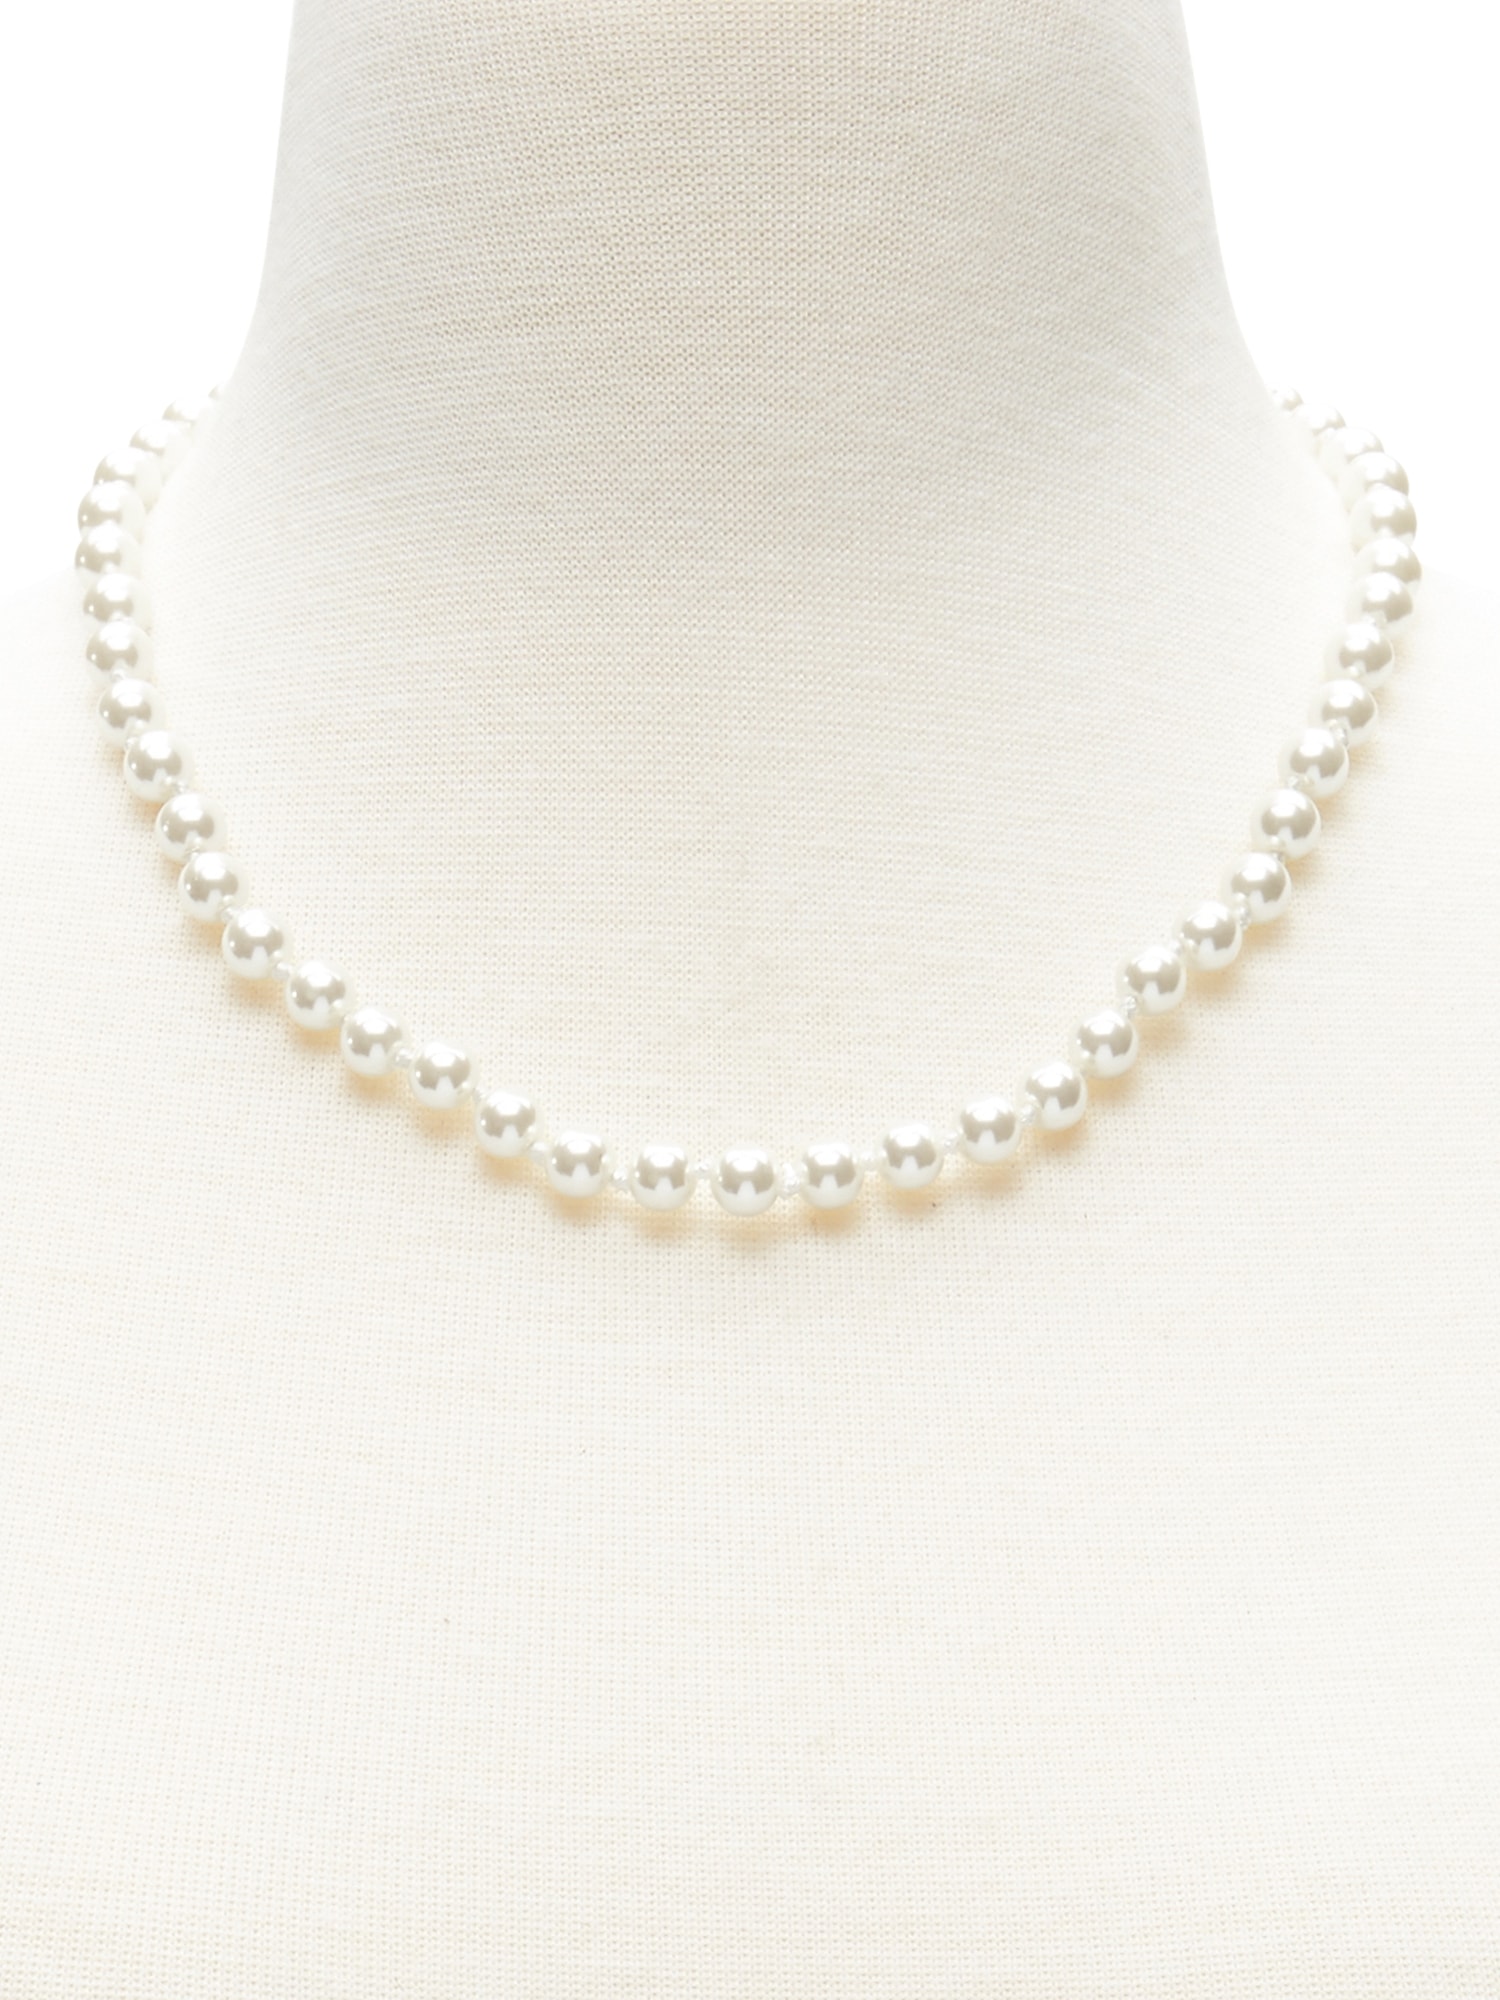 Pearl Strand Necklace